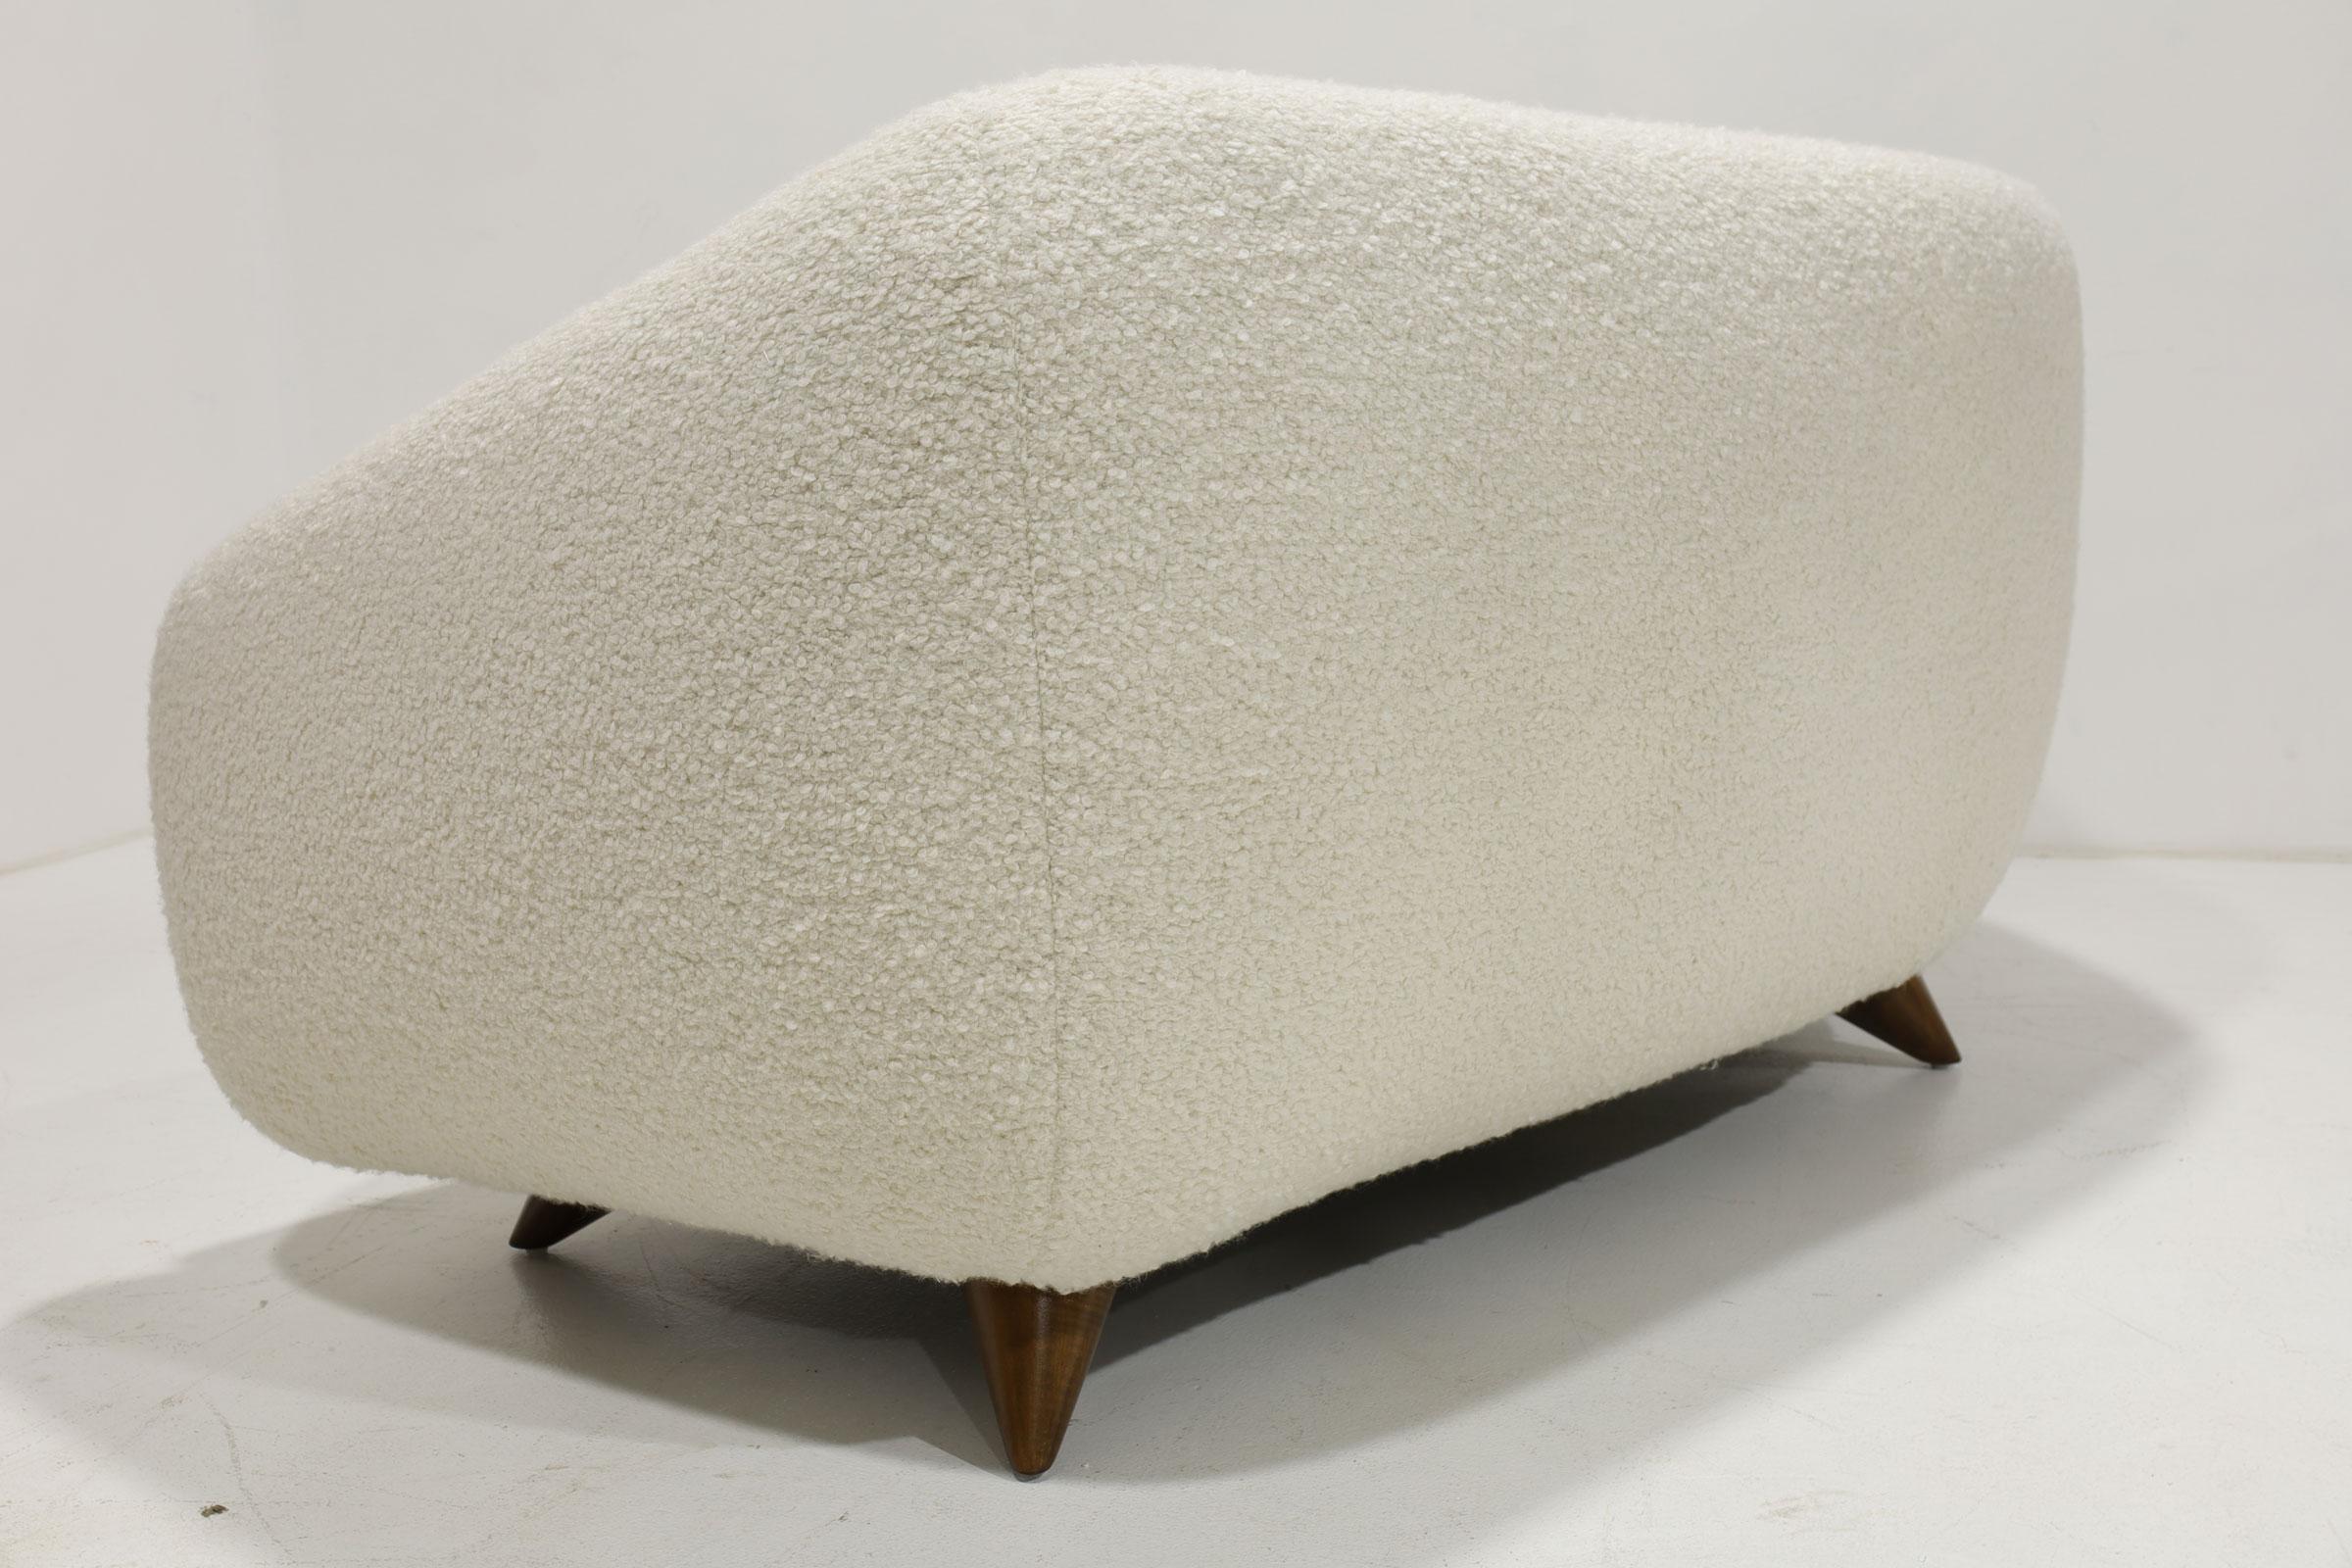 20th Century Vladimir Kagan Wide Angle Tangent Sofa, Model 506, in Holly Hunt Teddy, 1950s For Sale